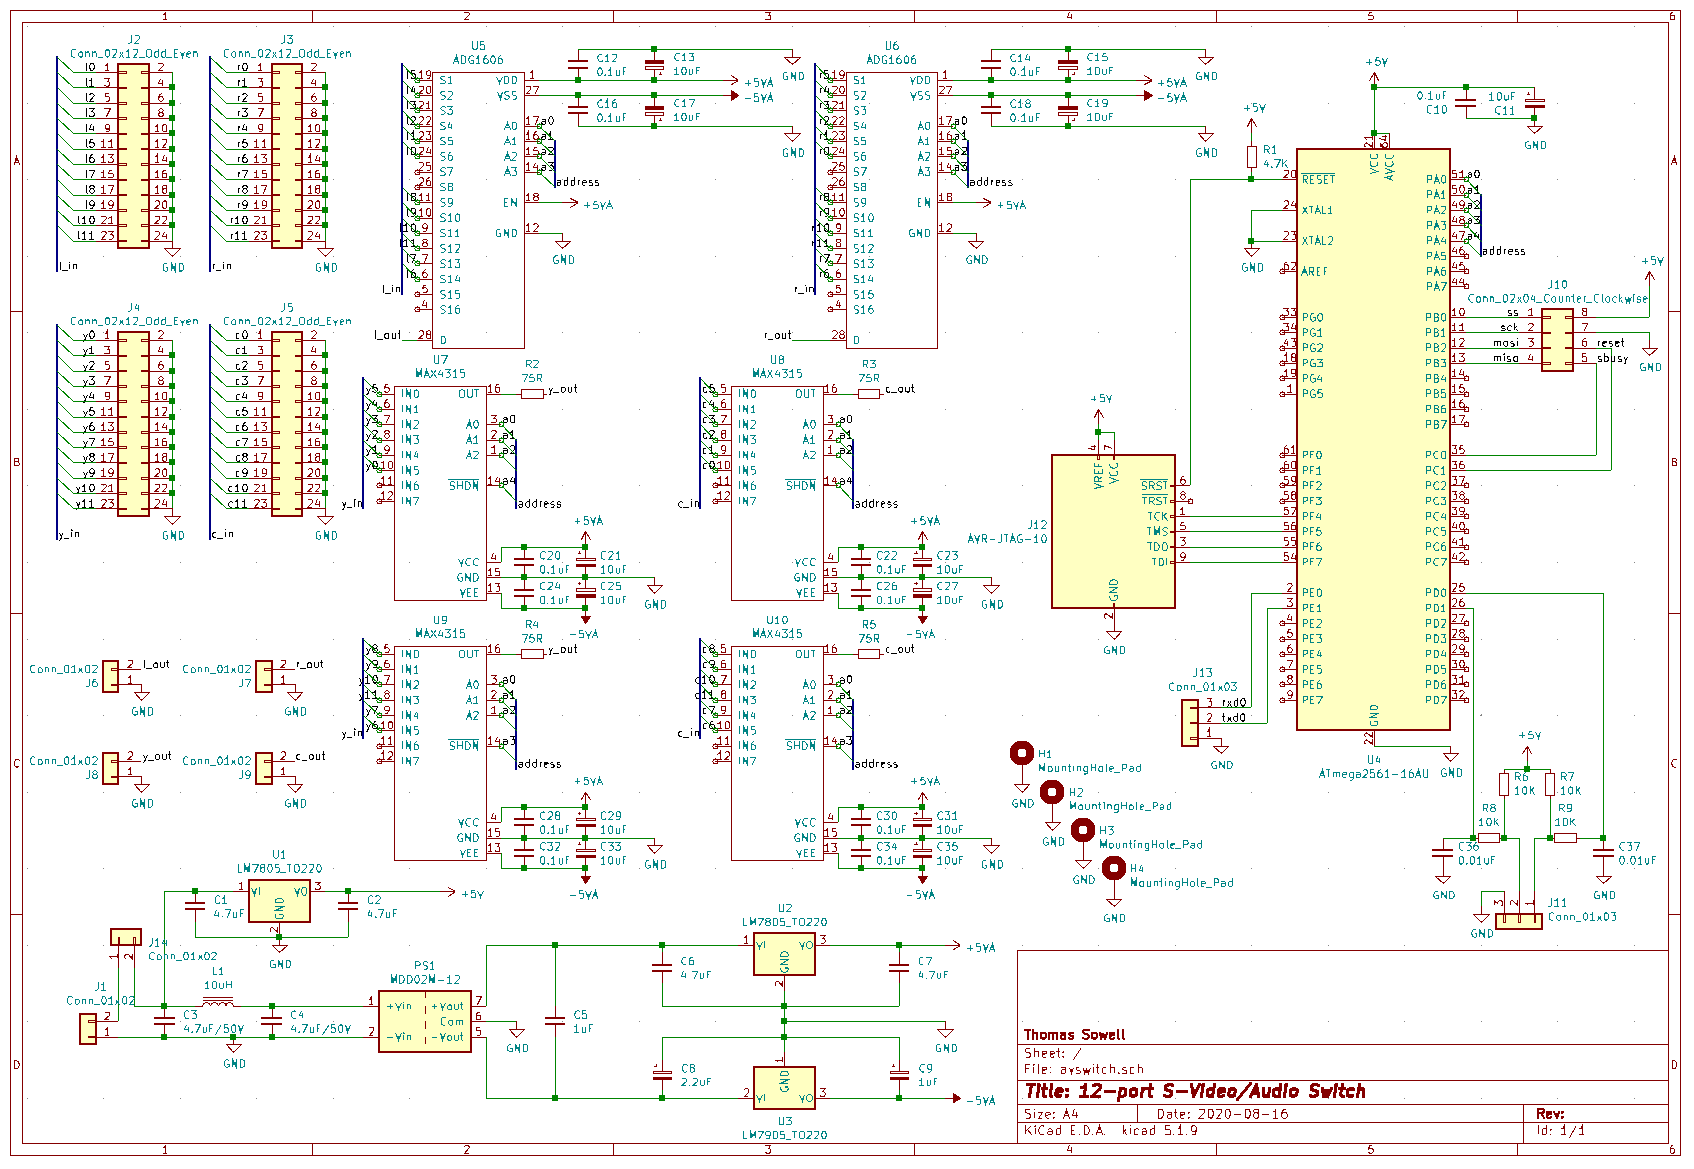 Full schematic of A/V switch